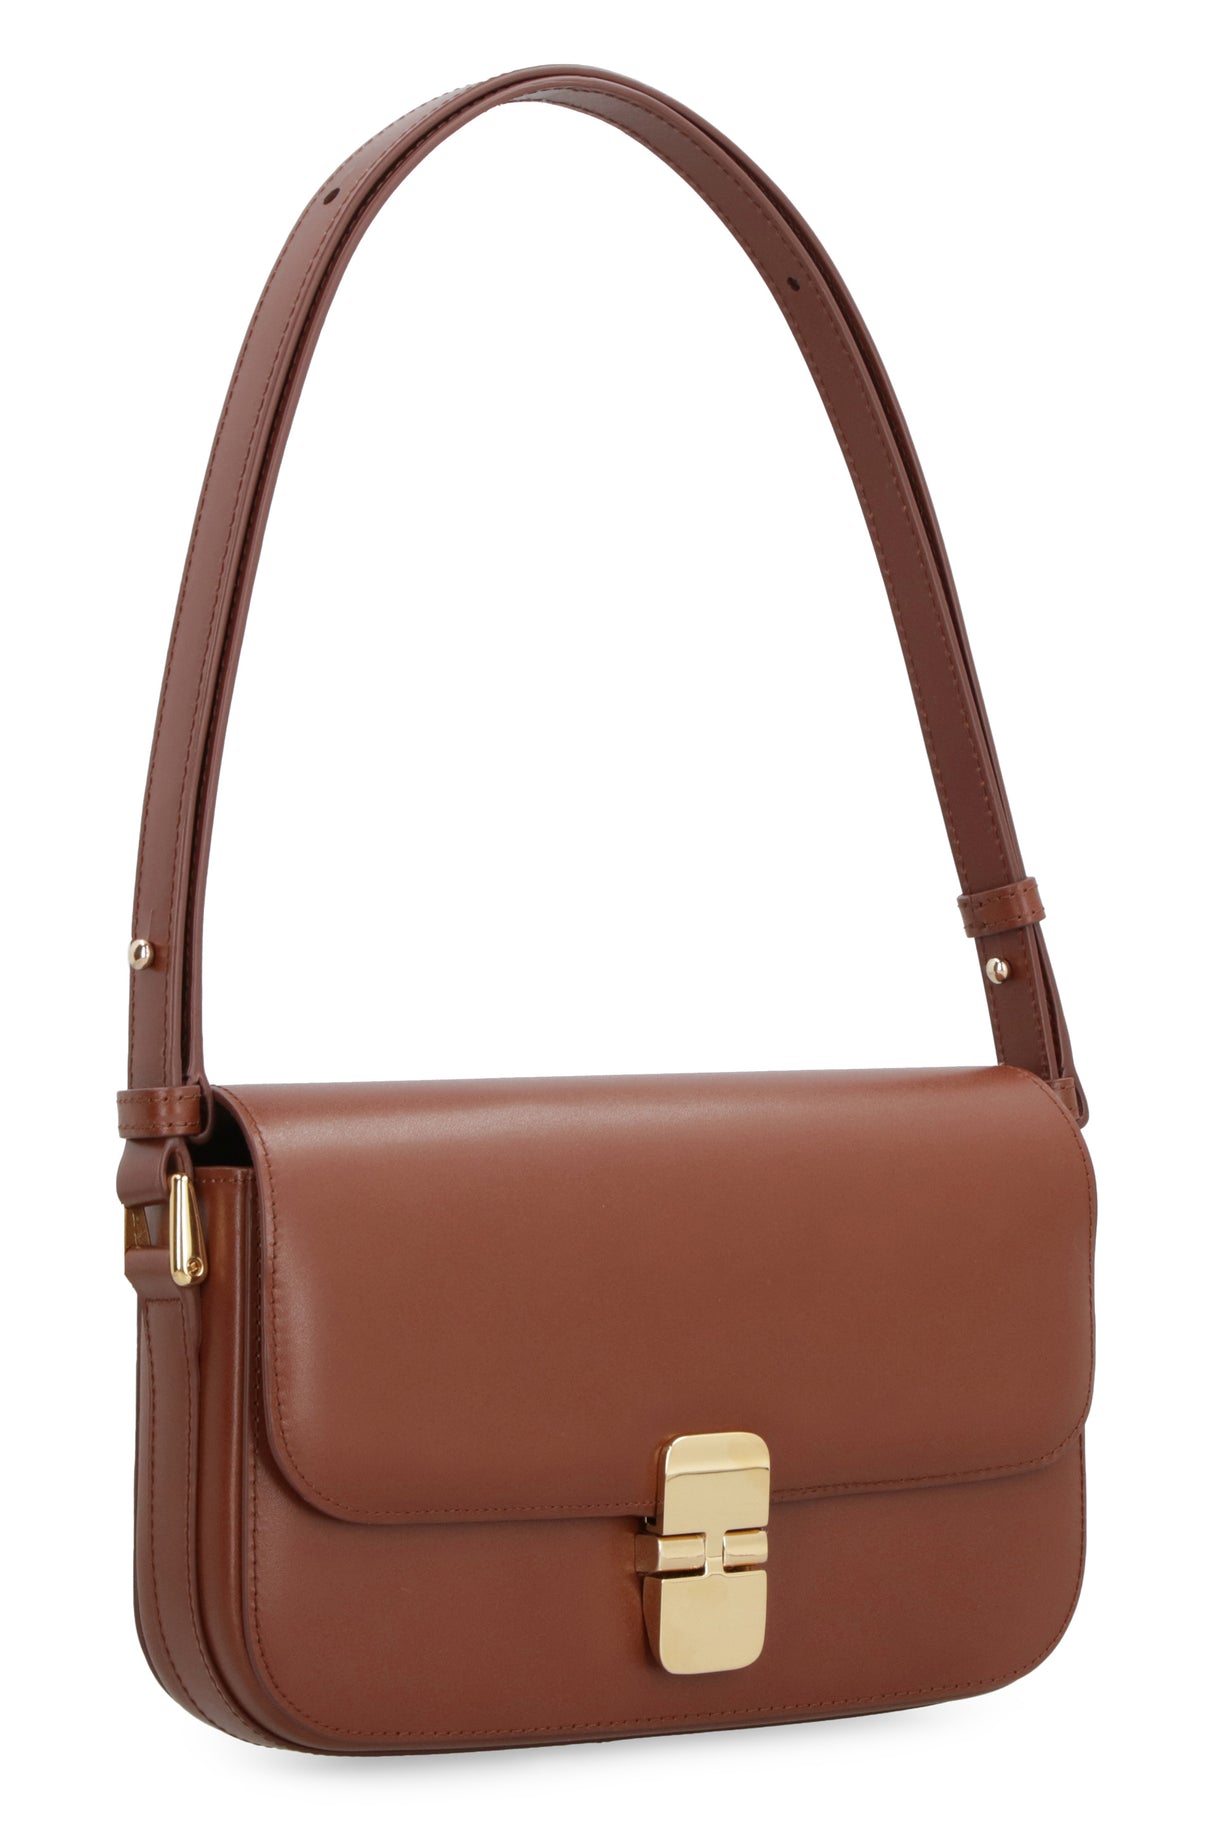 A.P.C. Women's Brown Smooth Leather Baguette Handbag for FW23